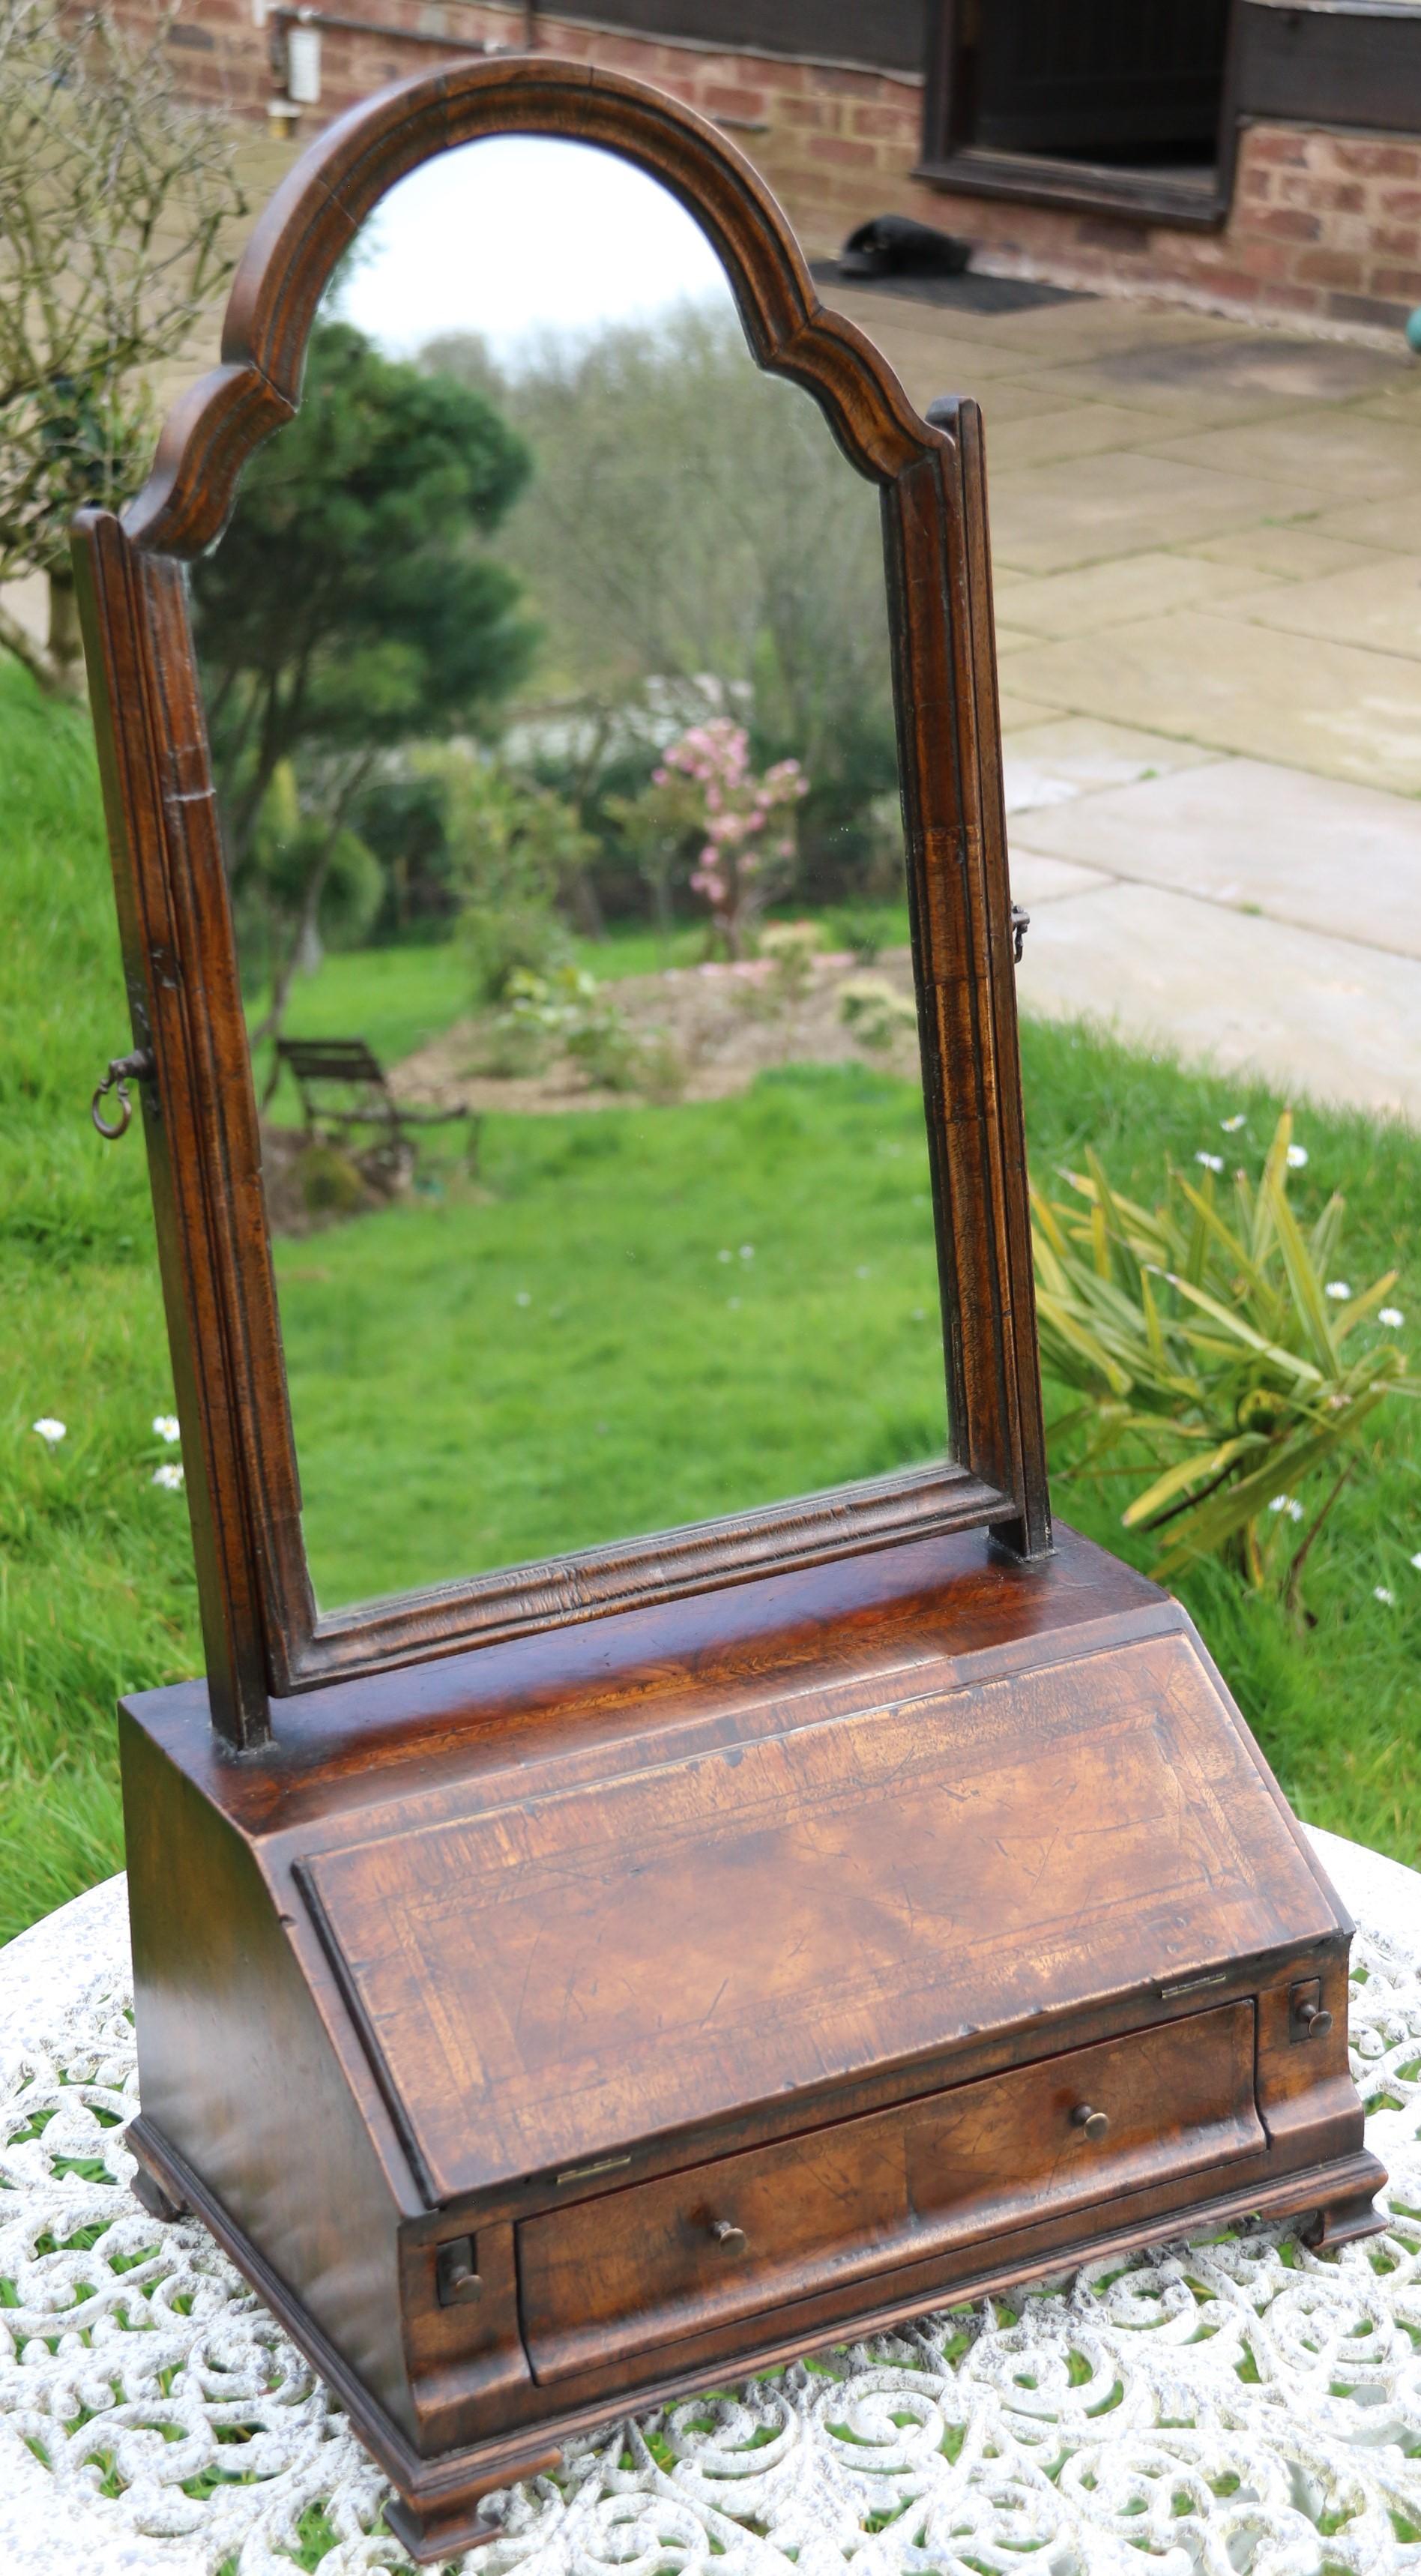 Antique rare early 18th century style figured walnut table mirror English C 1860 For Sale 6